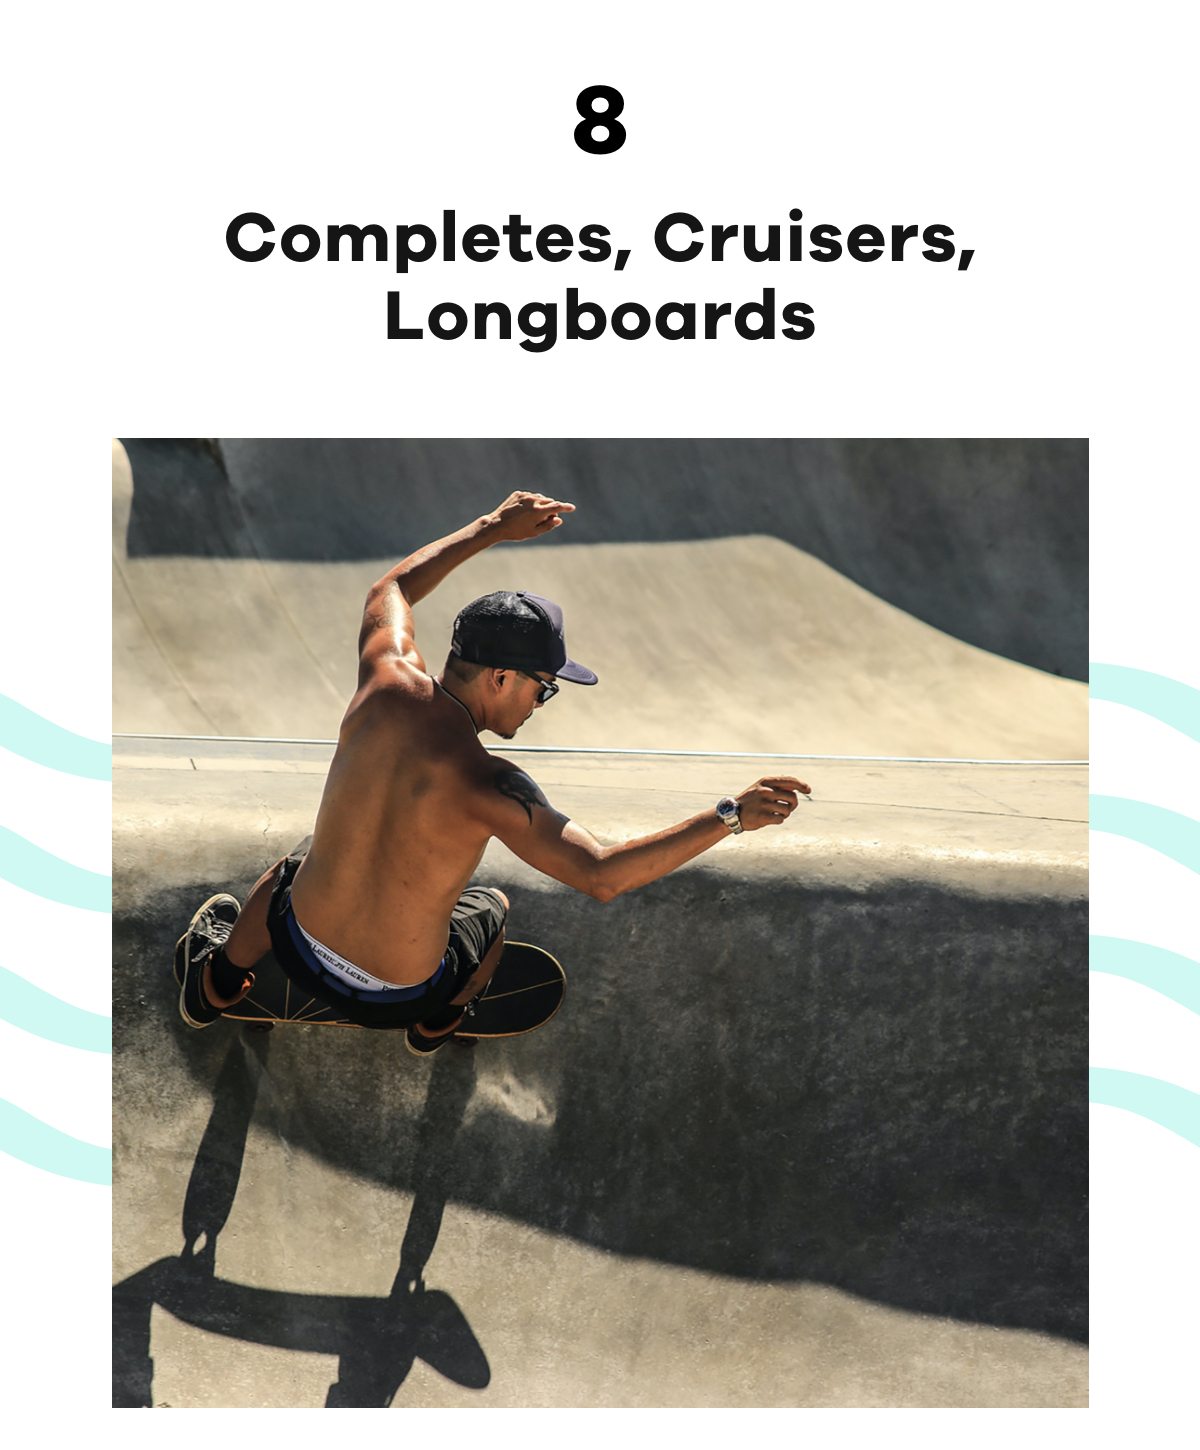 Completes, Cruisers, Longboards | All ready to ride straight out the box